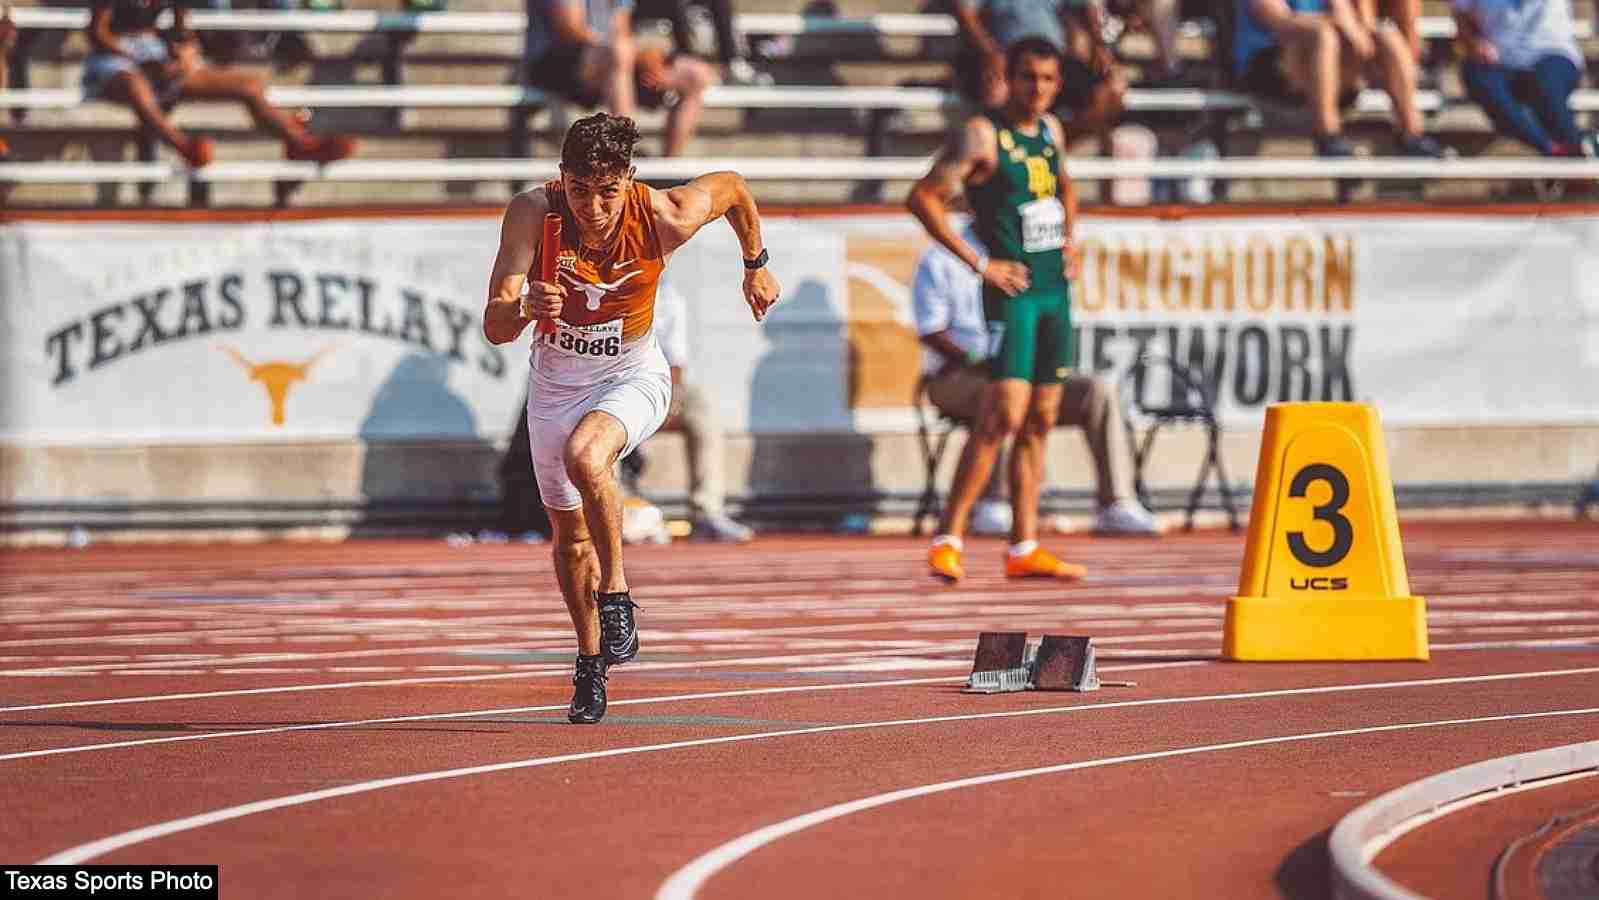 Texas Relays back to the full schedule for 2022